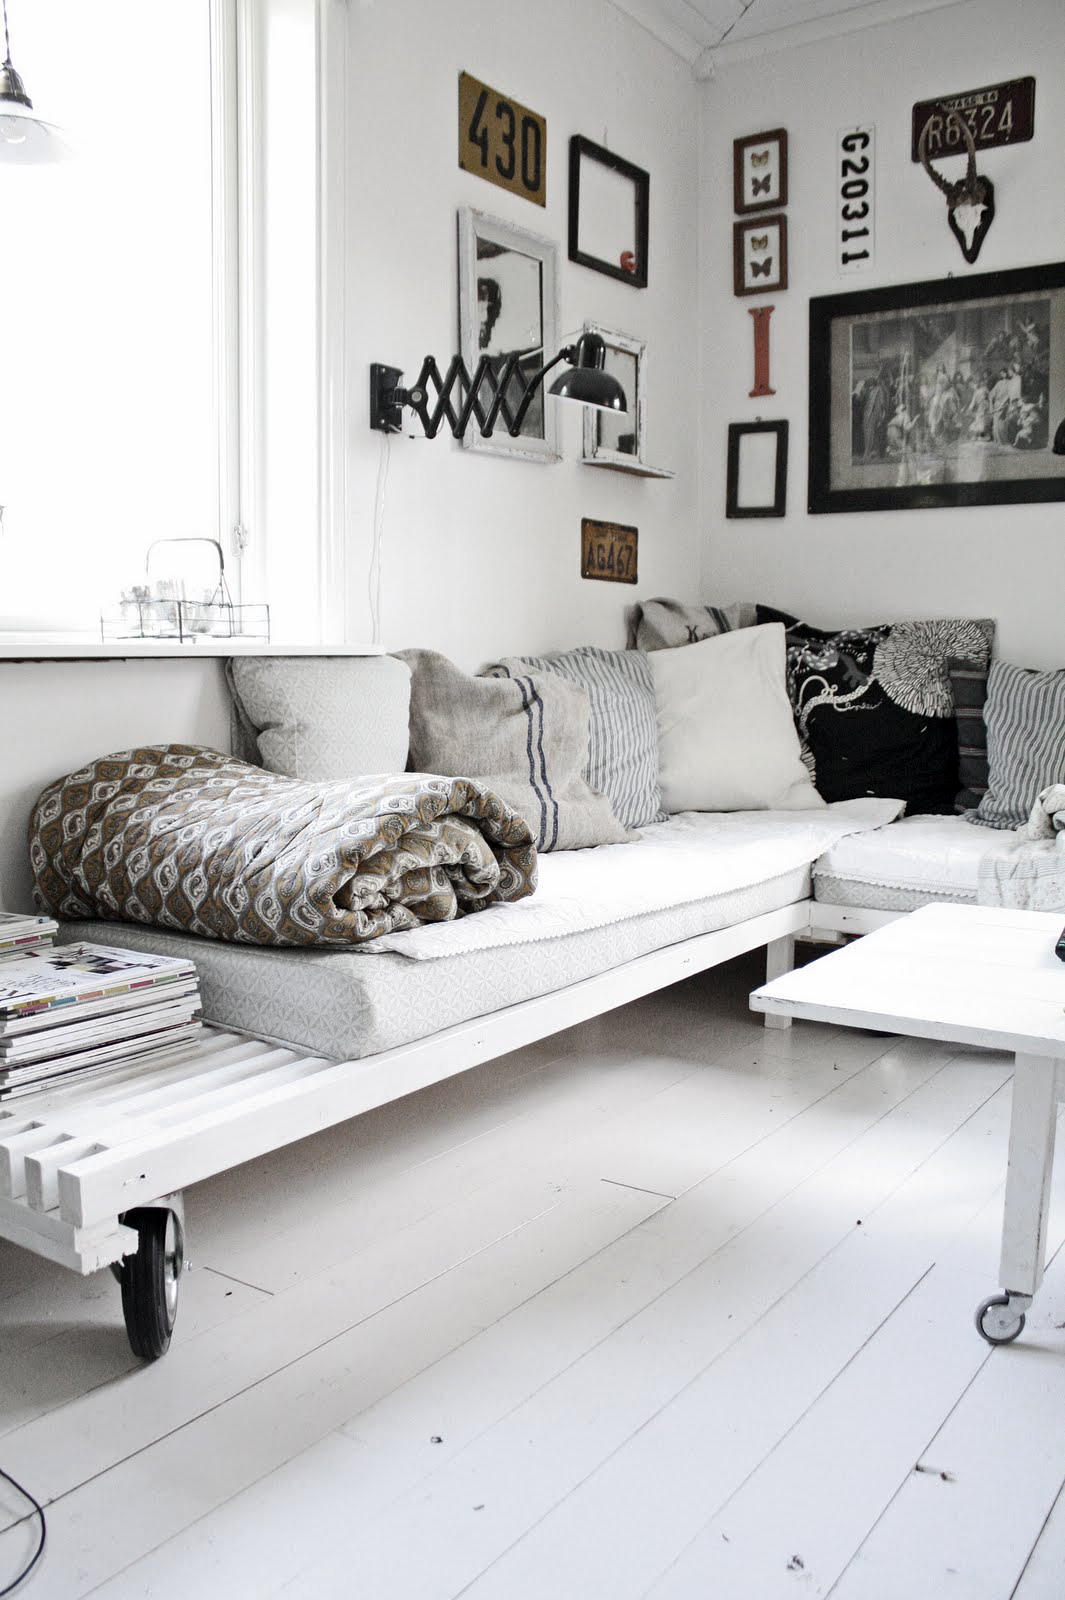 Comfy DIY Pallet Sofa Ideas That Look Surprisingly Stylish - Page 2 of 3